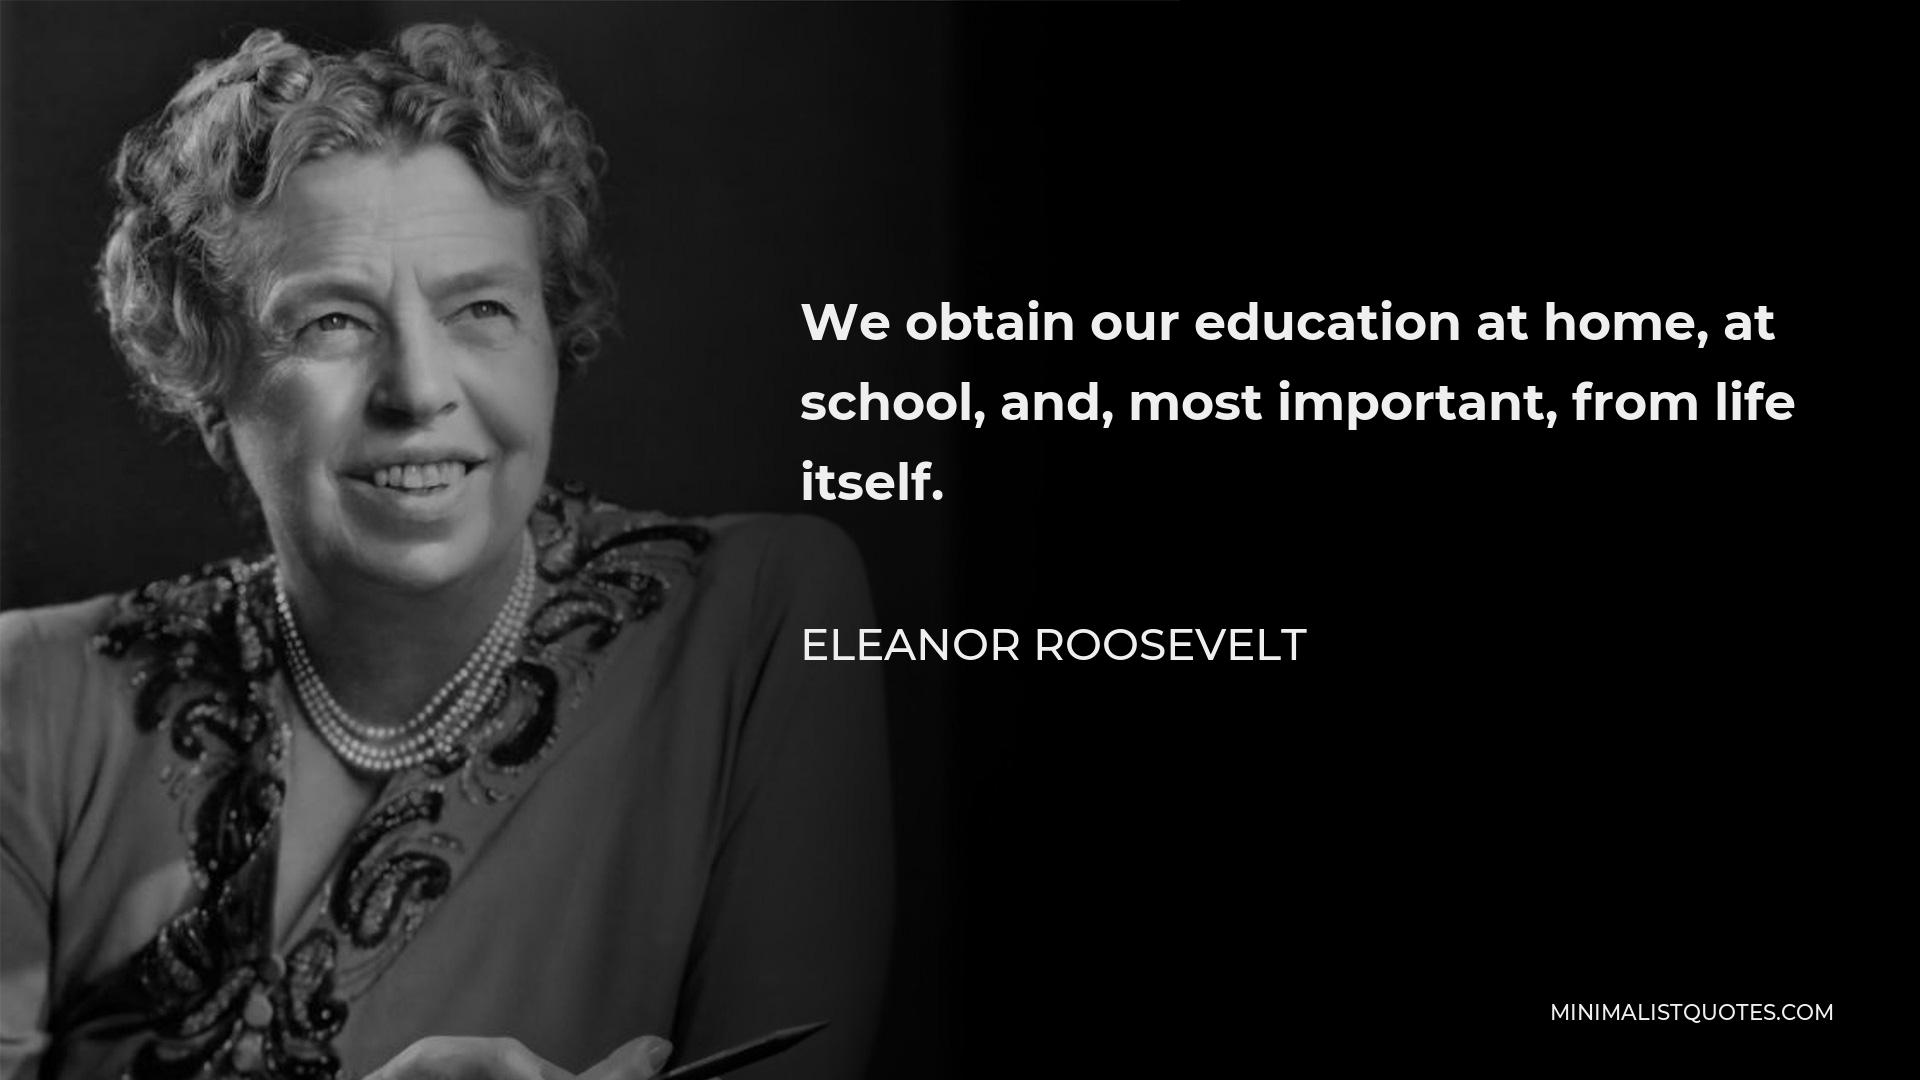 Eleanor Roosevelt Quote - We obtain our education at home, at school, and, most important, from life itself.